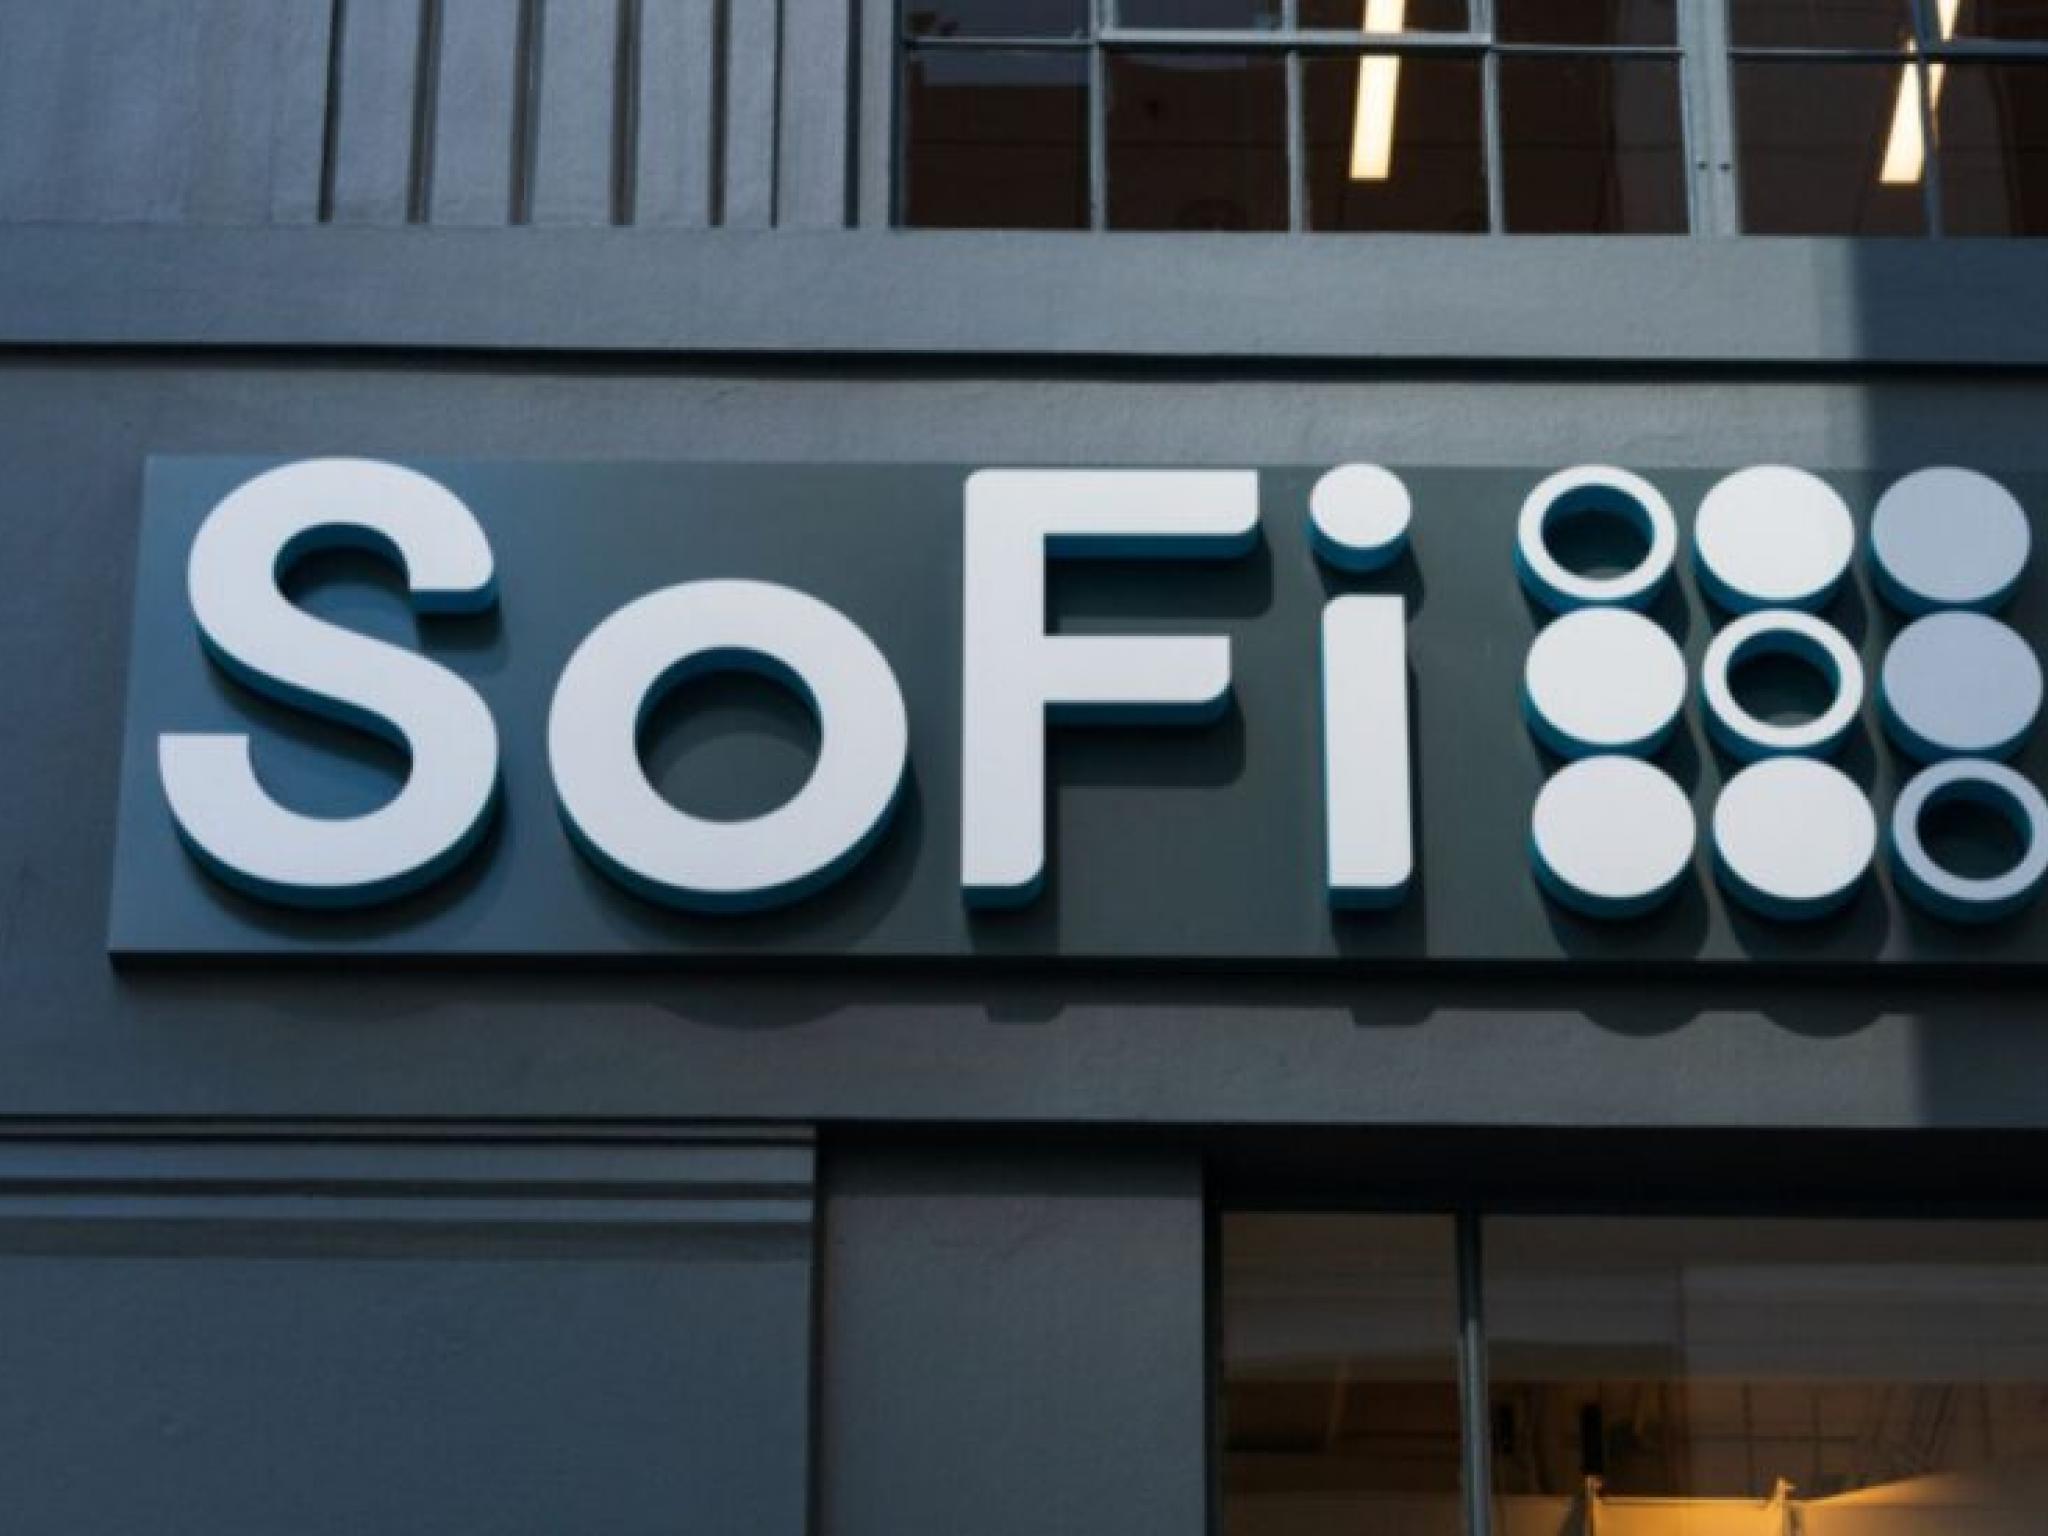  sofis-transaction-revenue-skyrockets-analyst-foresees-major-growth-higher-valuation 